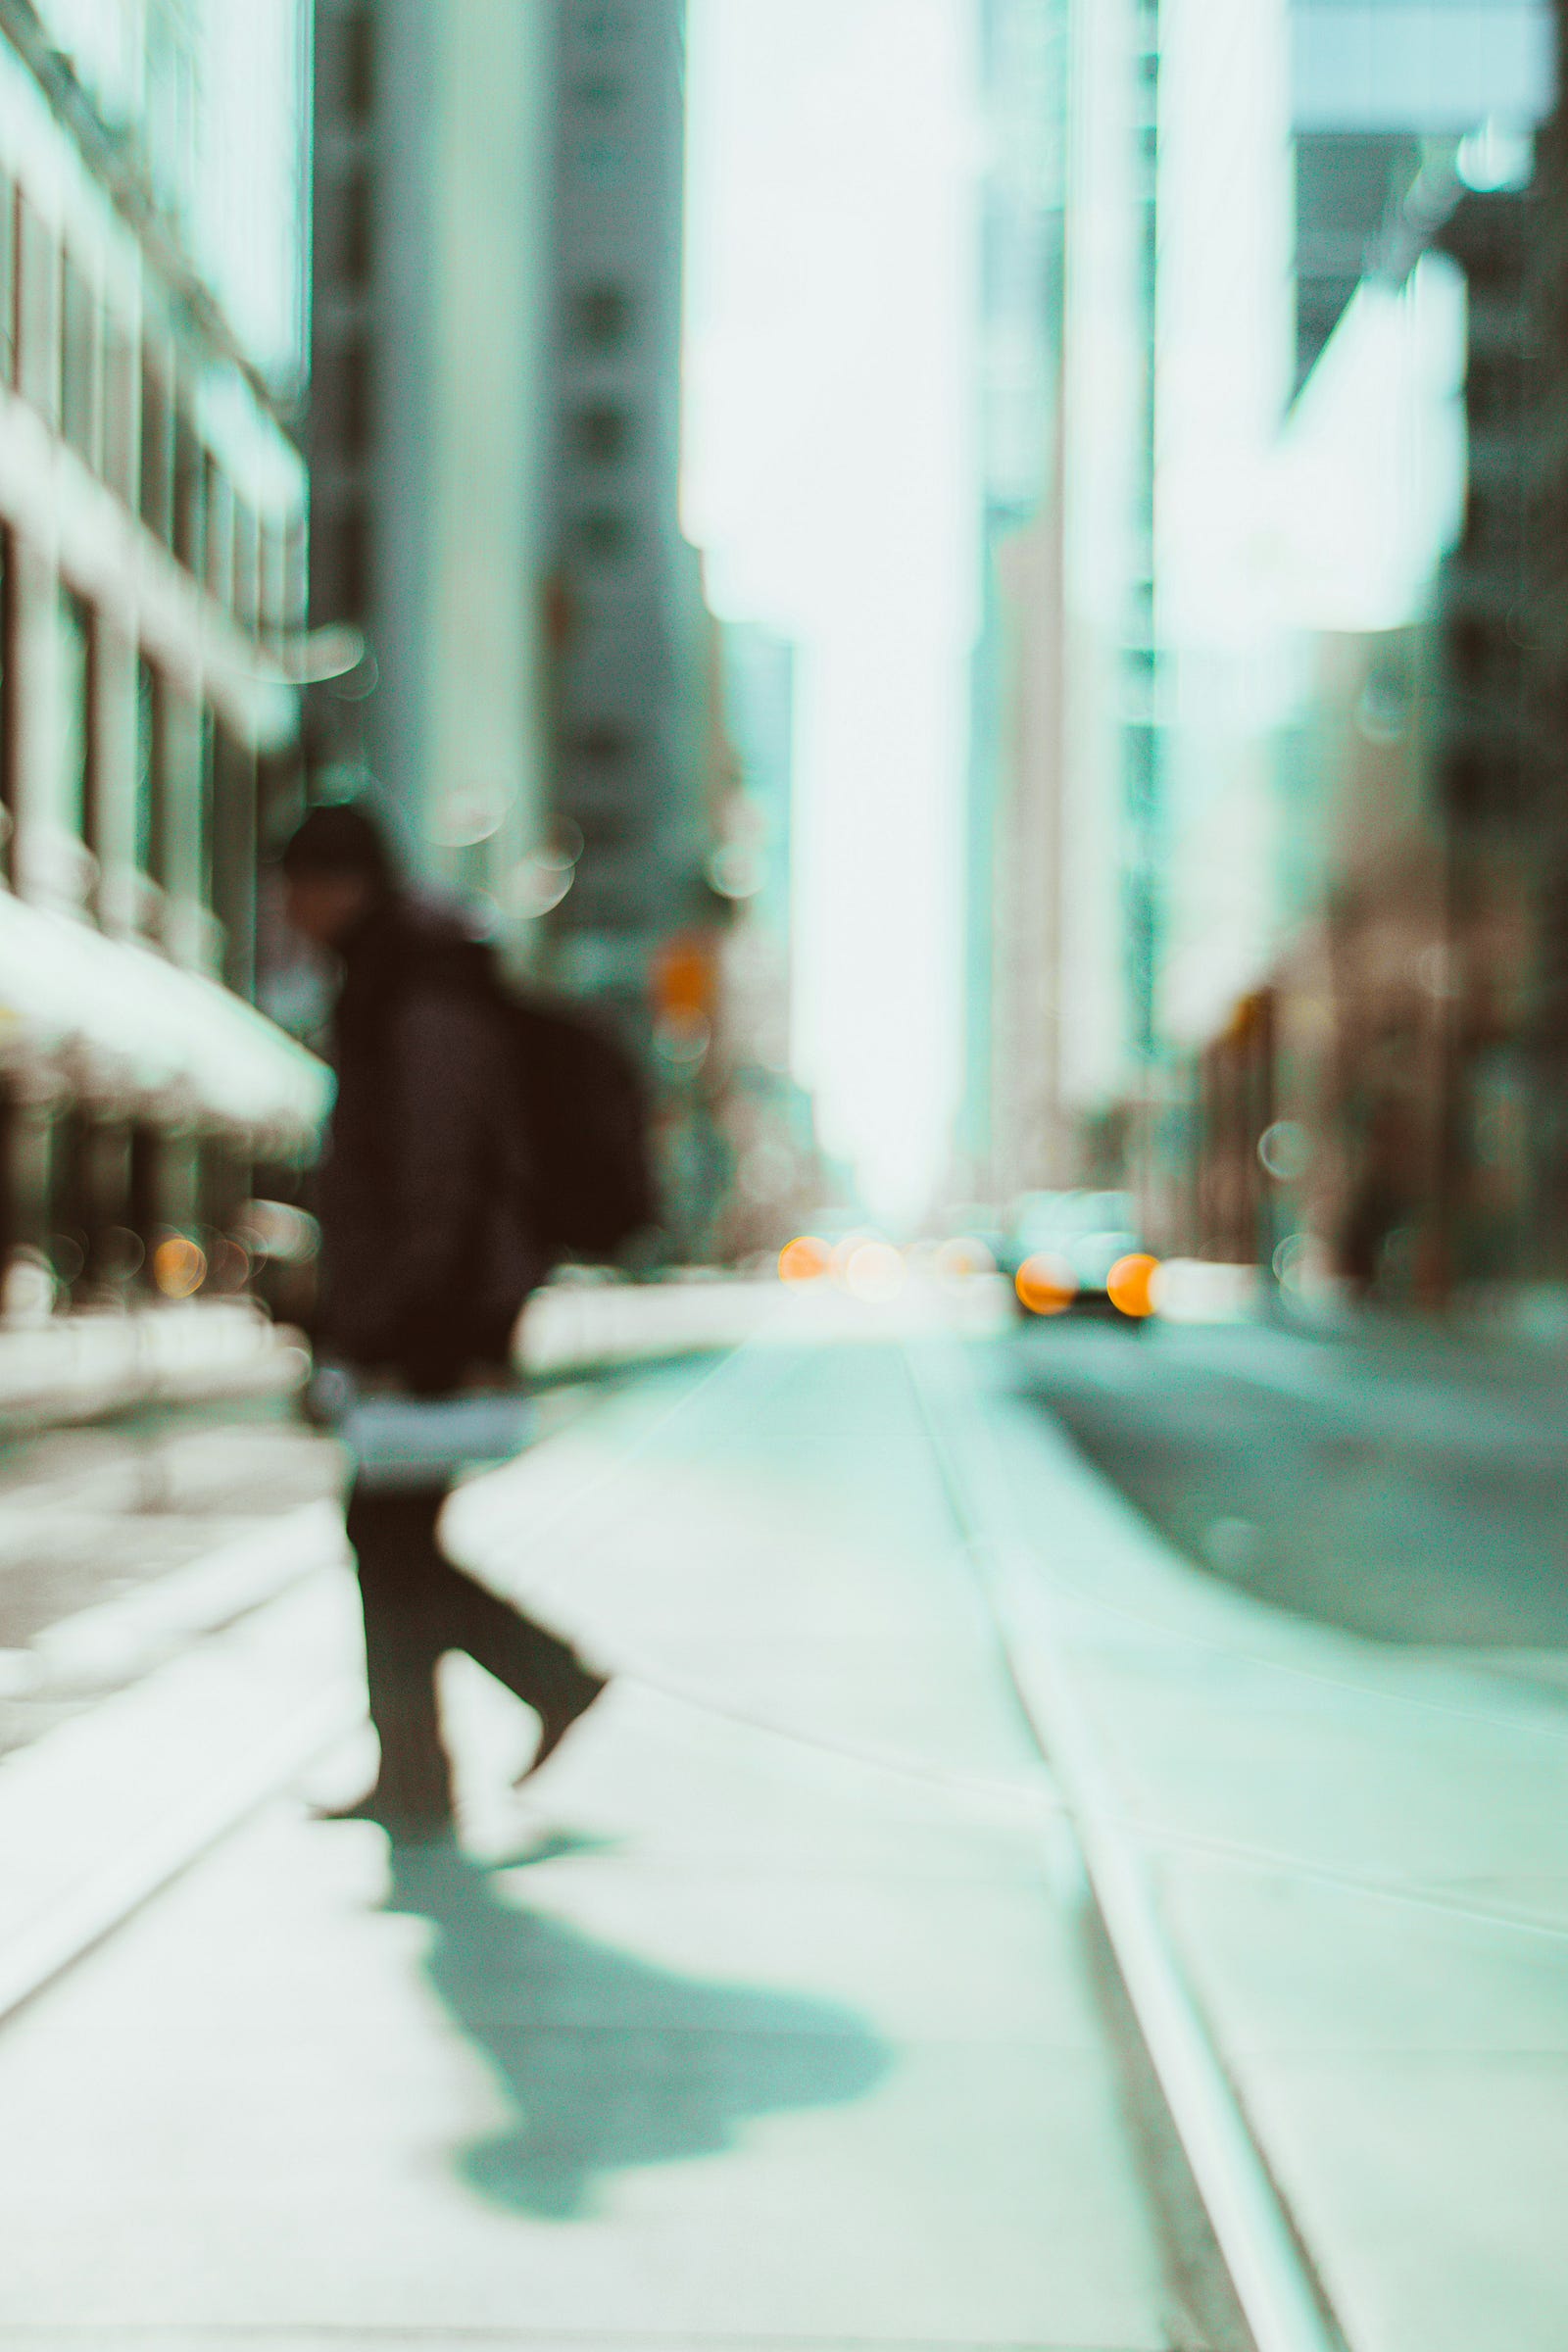 A blurry image of a man crossing a city street. Diabetes can cause blurred vision.